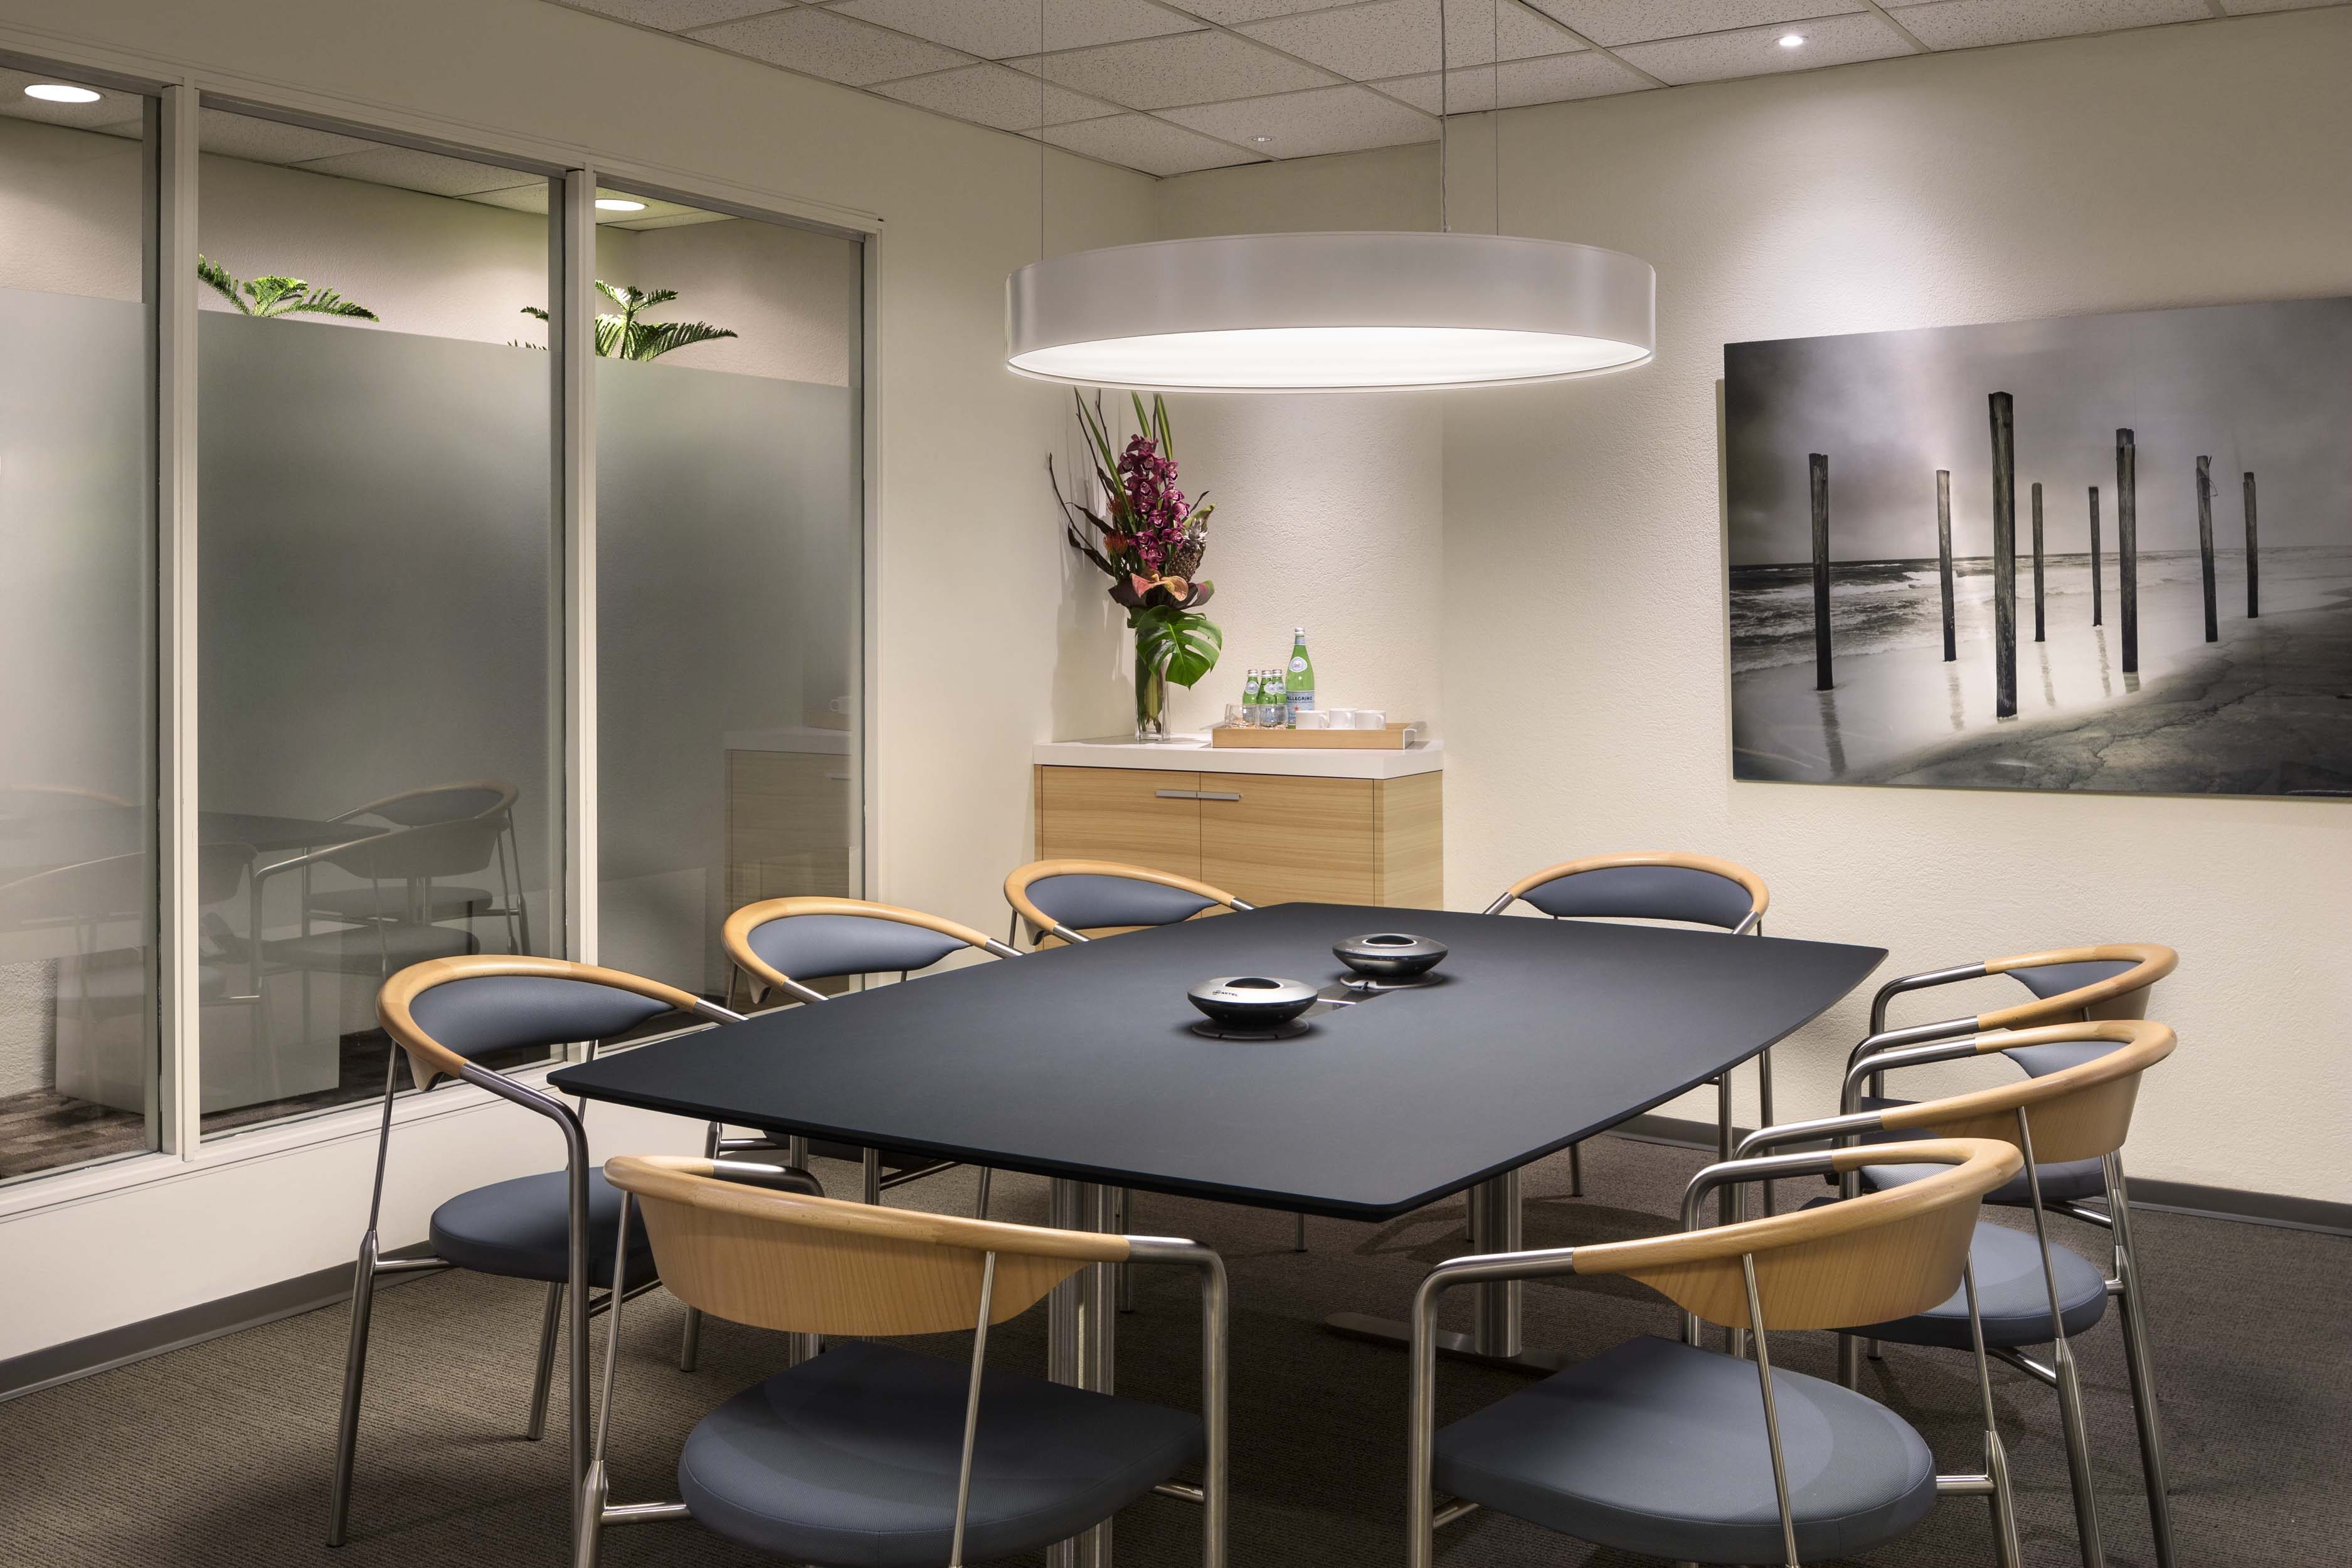 Four fully equipped meeting rooms available by the hour, half/full day, on-site storage, caterers, secure bicycle room, shower/changing room.